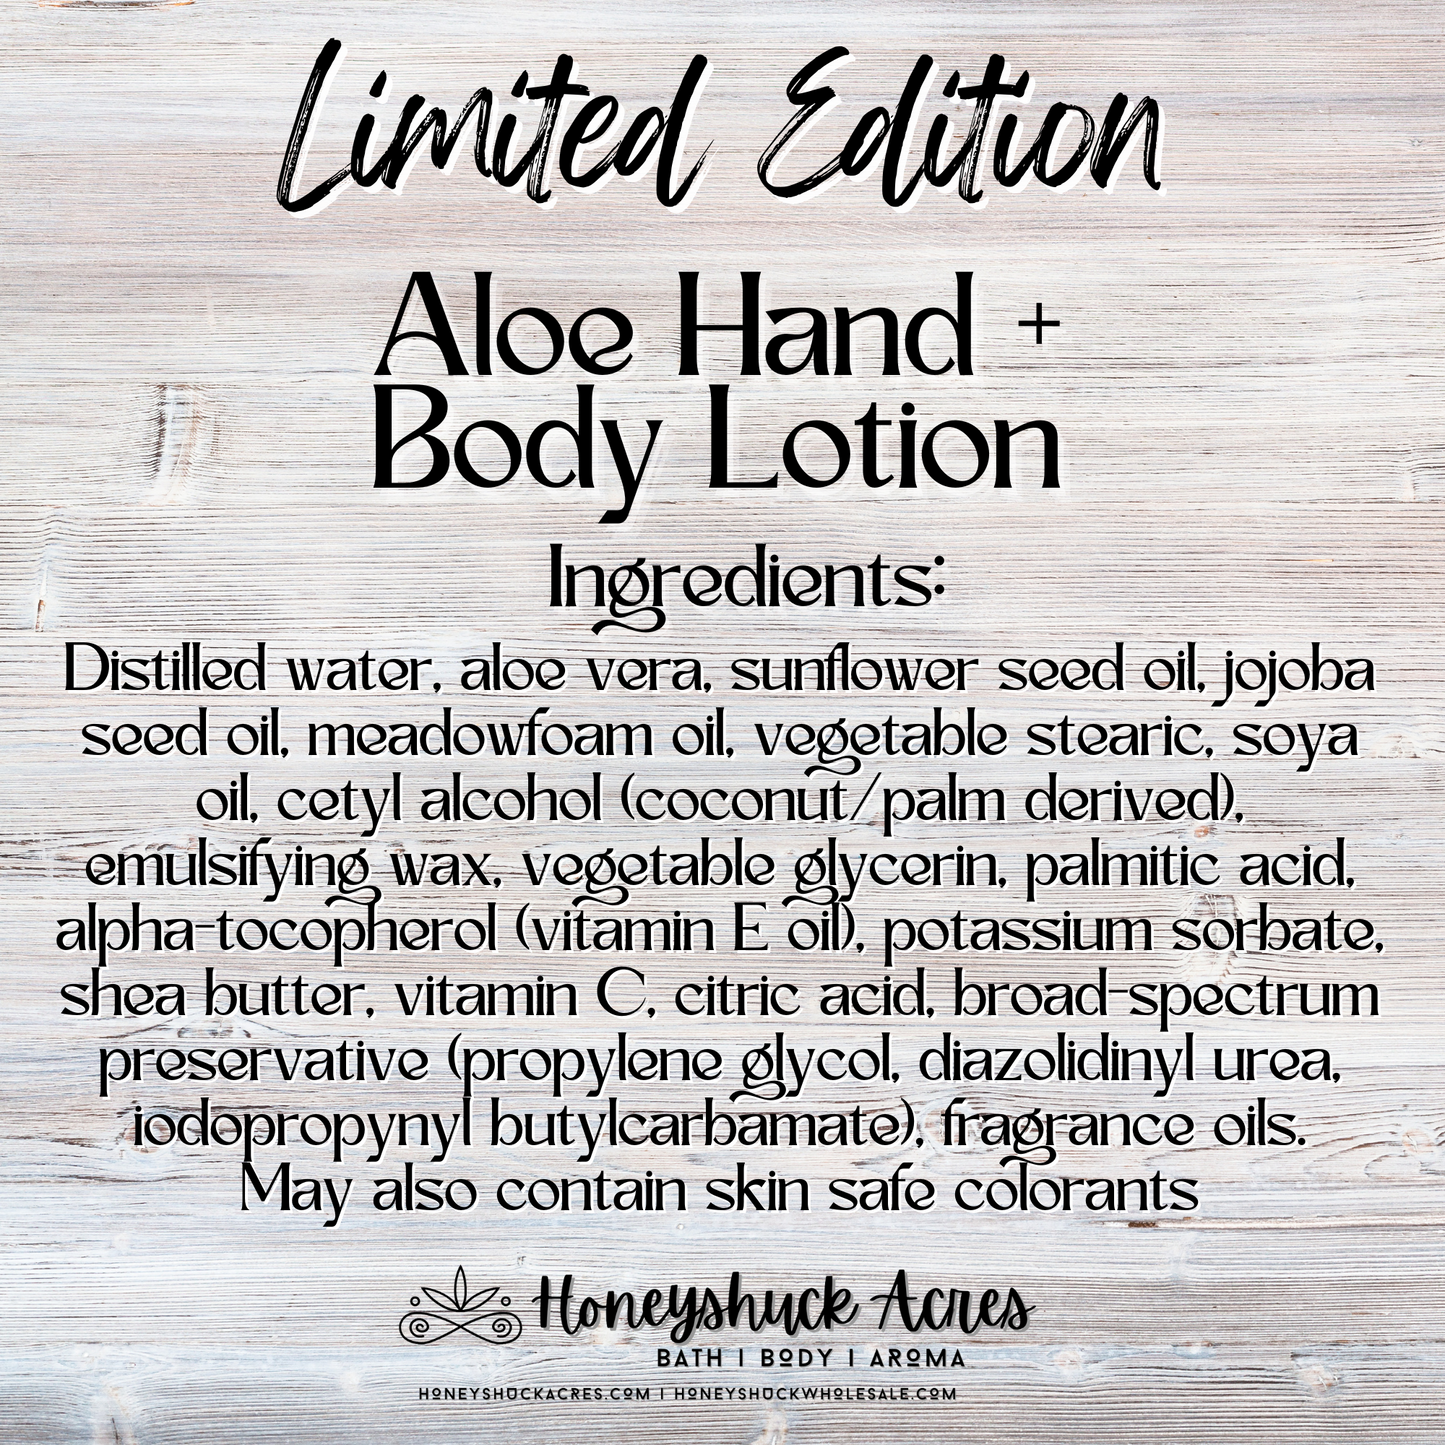 Limited Edition Aloe Hand + Body Lotion | Spring Lilac